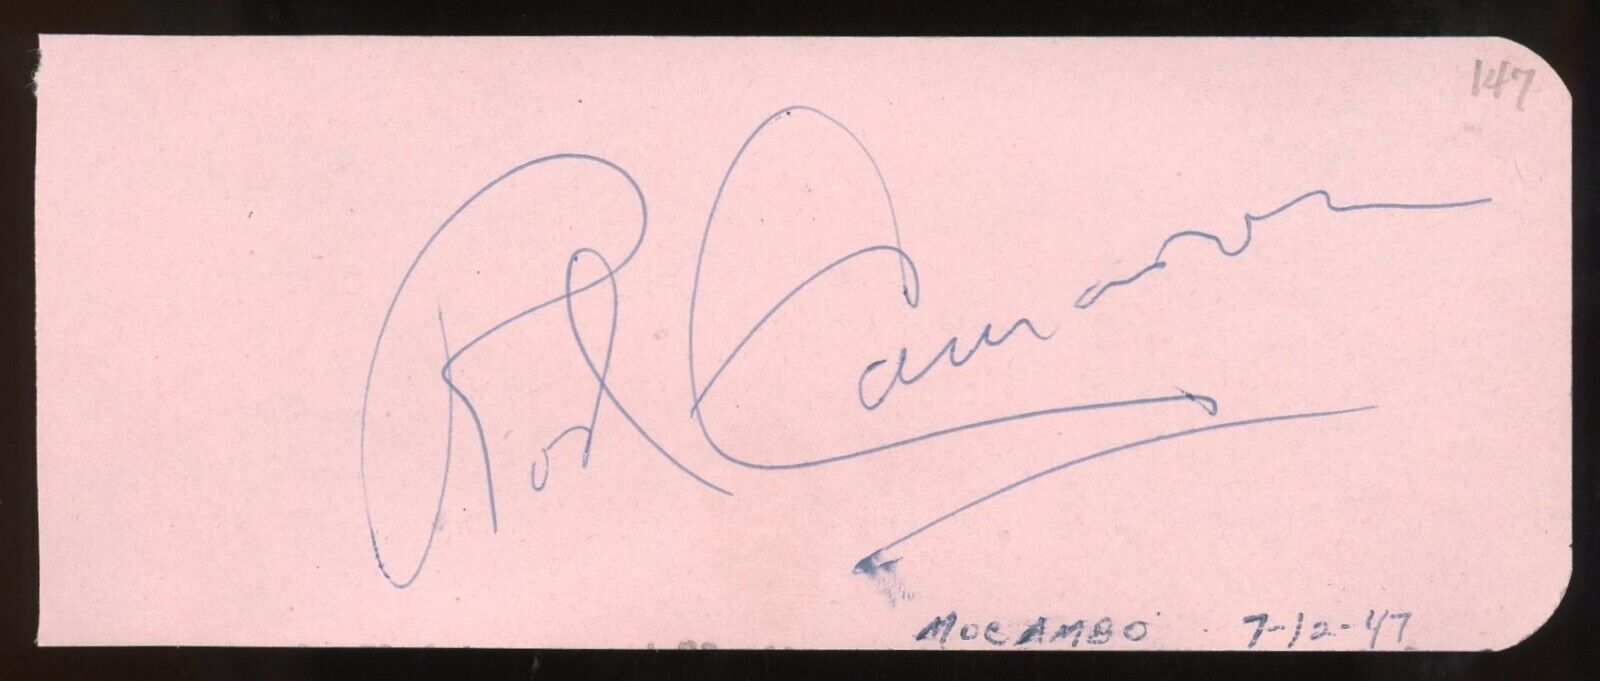 Rod Cameron d1983 signed 2x5 cut autograph on 7-12-47 at Mocambo Theater LA